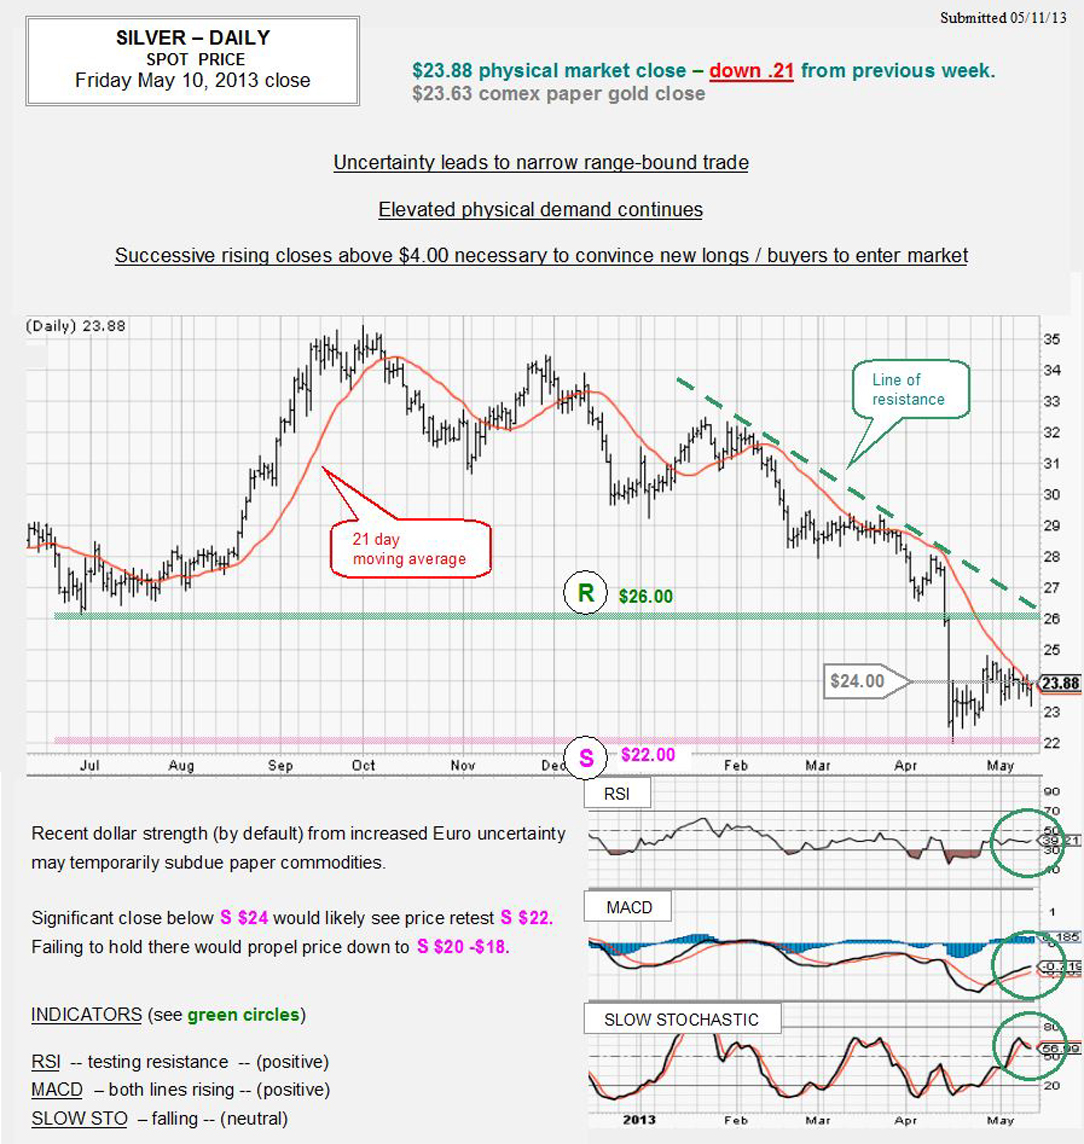 MAY 10, 2013 chart & commentary